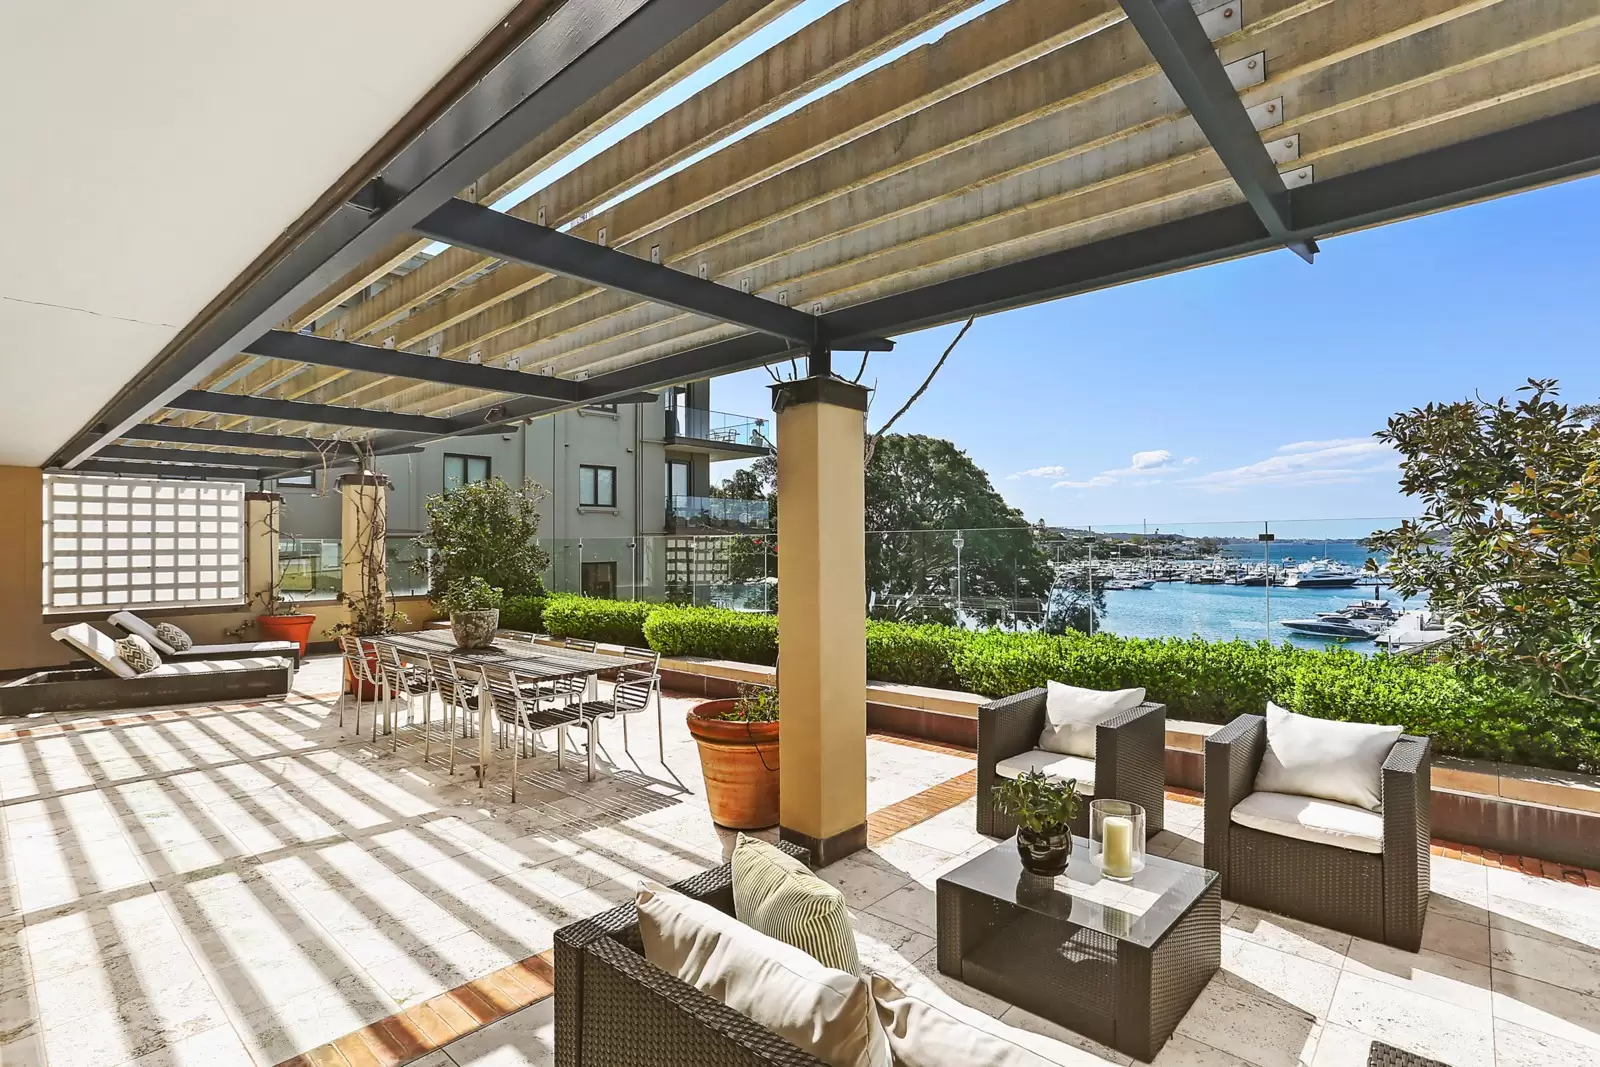 Photo #9: 3/589 New South Head Road, Rose Bay - Sold by Sydney Sotheby's International Realty